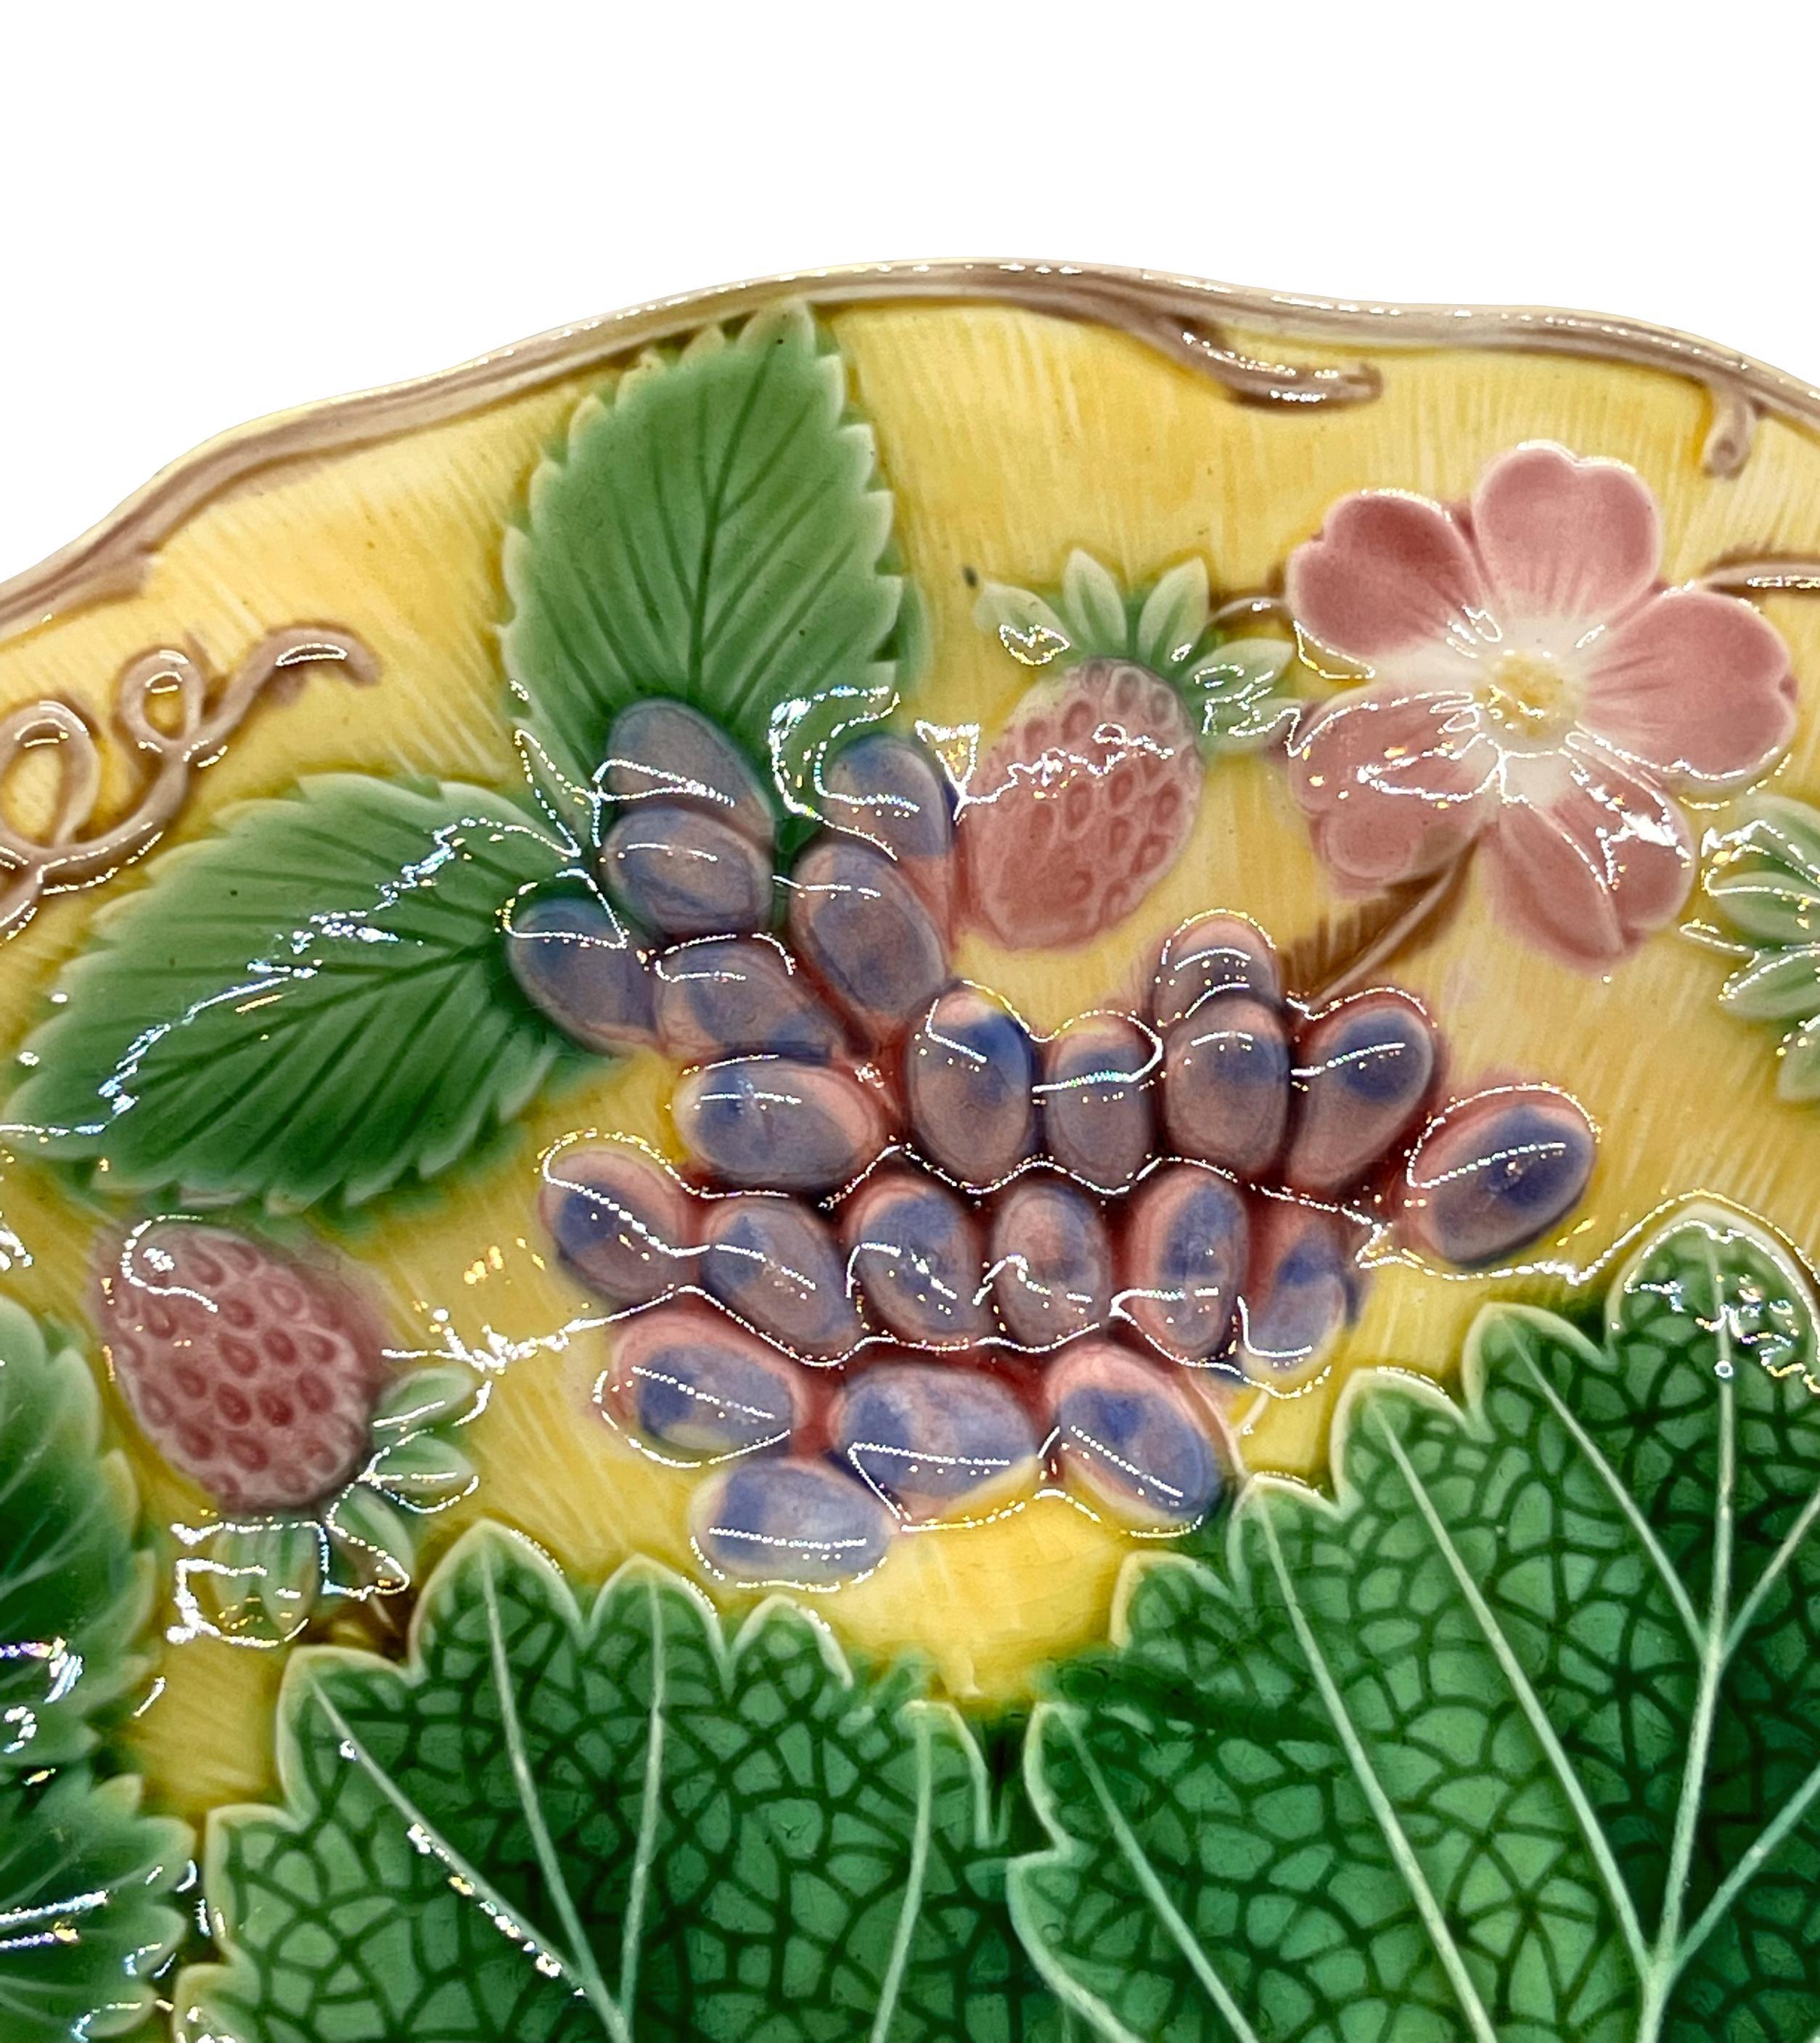 Wedgwood Majolica 'Vine & Strawberry' plate, English, dated 1930, with a large central green grape leaf, purple grapes, reddish pink strawberries and blossoms on a yellow ground. Impressed marks to reverse: 'Wedgwood' 'MADE IN ENGLAND' and the